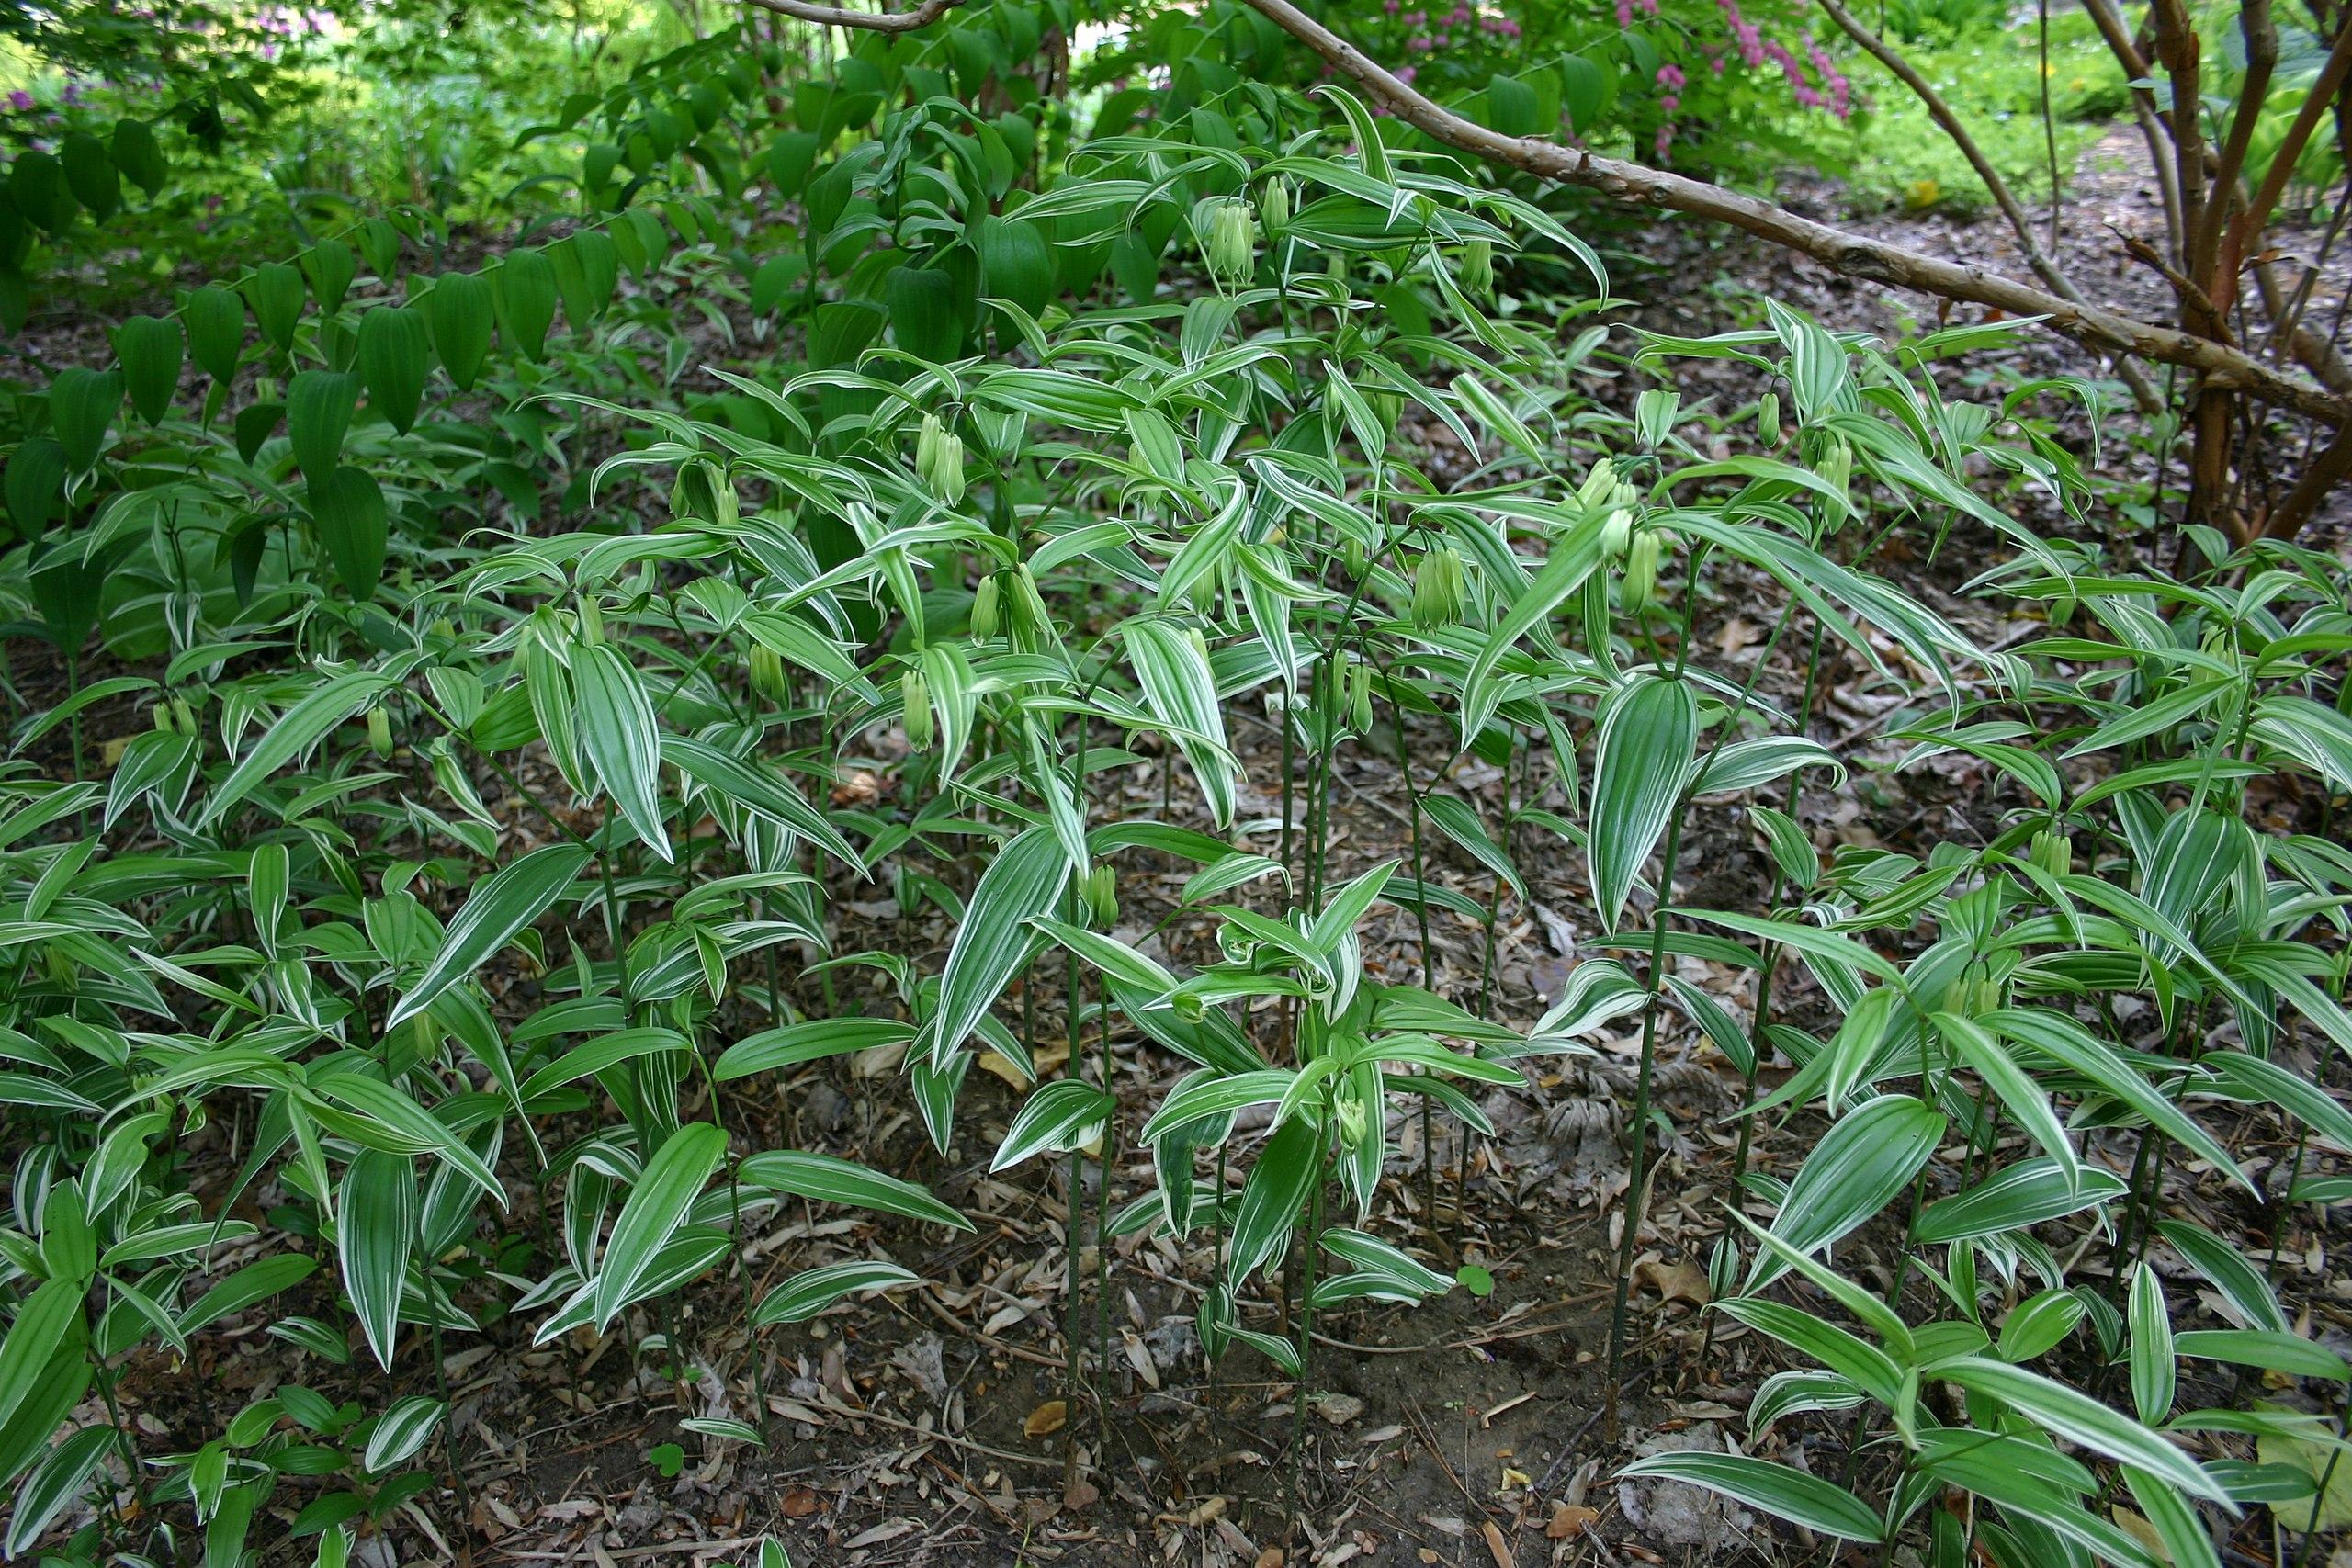 green flowers with white-green foliage and brown stems and branches